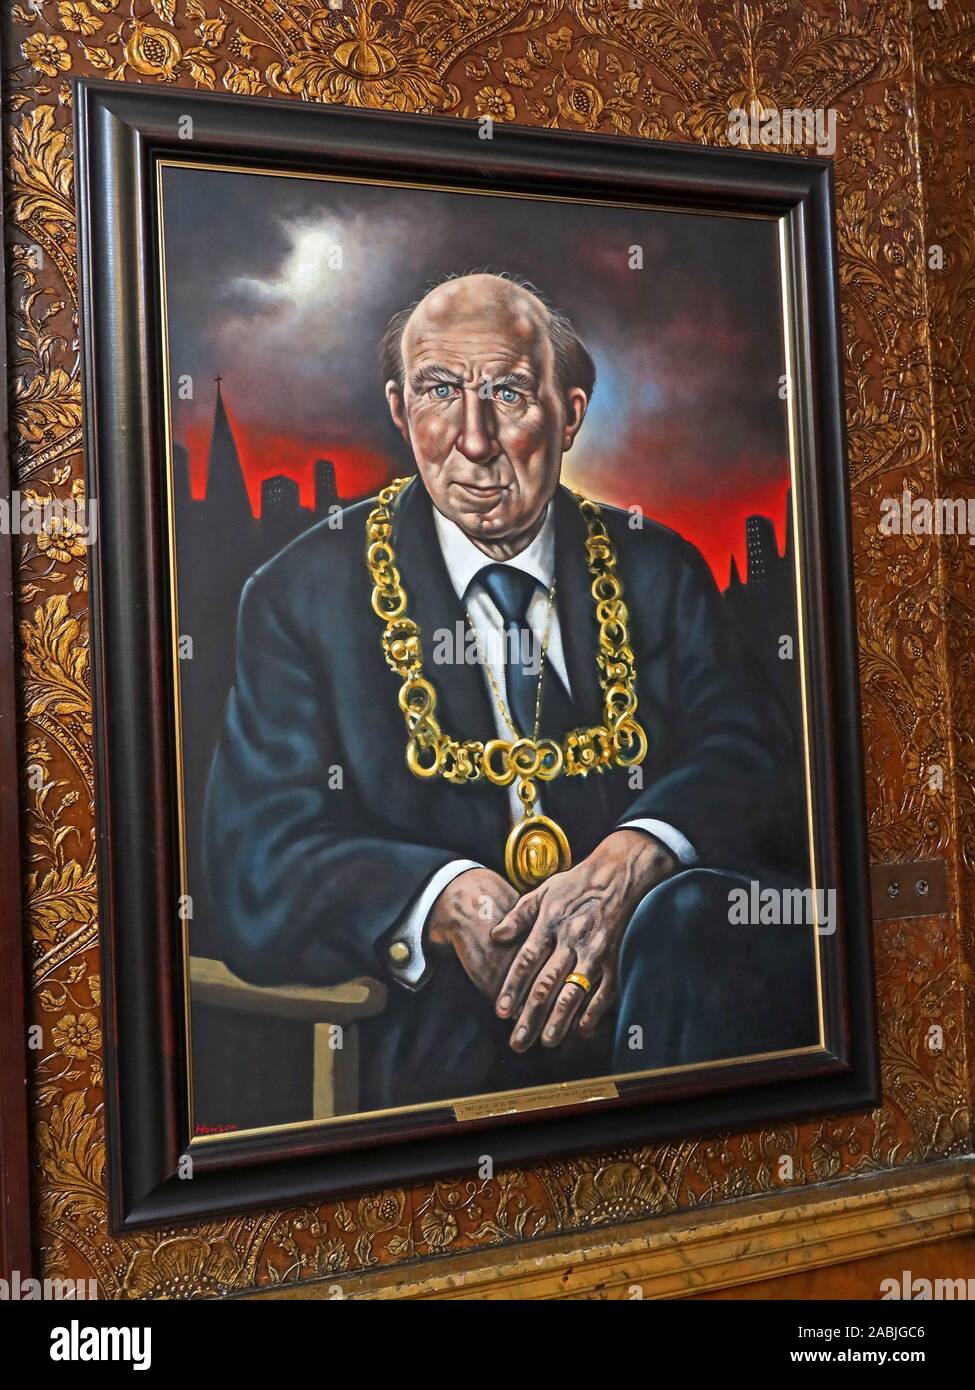 Lord Provost Portrait Gallery, Pat Lally, Glasgow City Chambers, George Square, Glasgow, Scotland, G2 1AL, Feb 1926 – 8 June 2018 Stock Photo